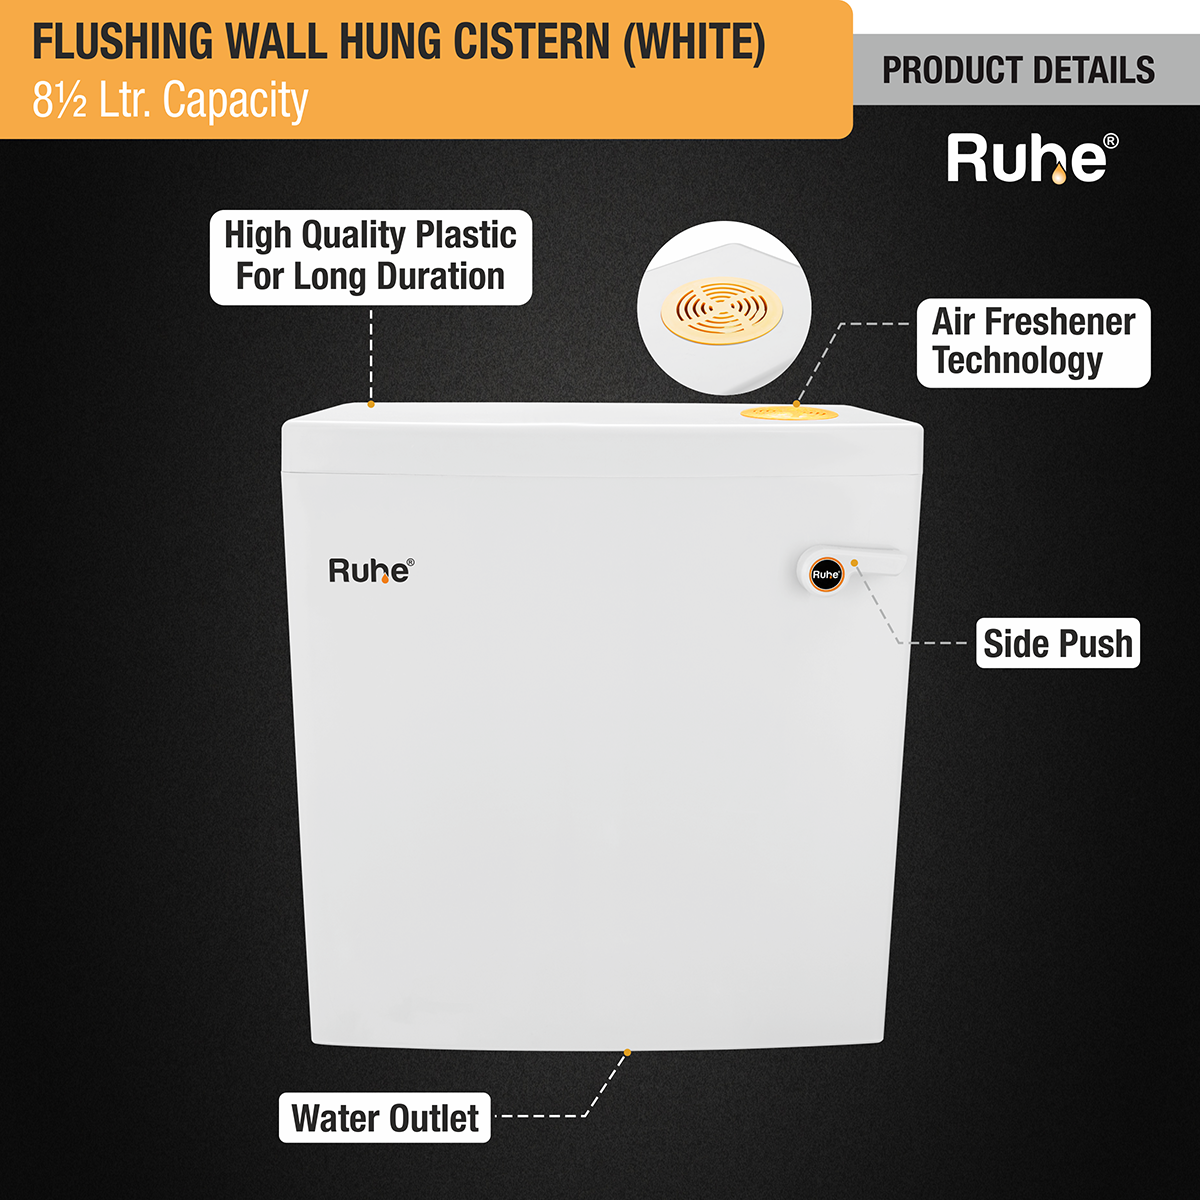 Flushing Wall Hung Cistern 8.5 Ltr. (White) product details